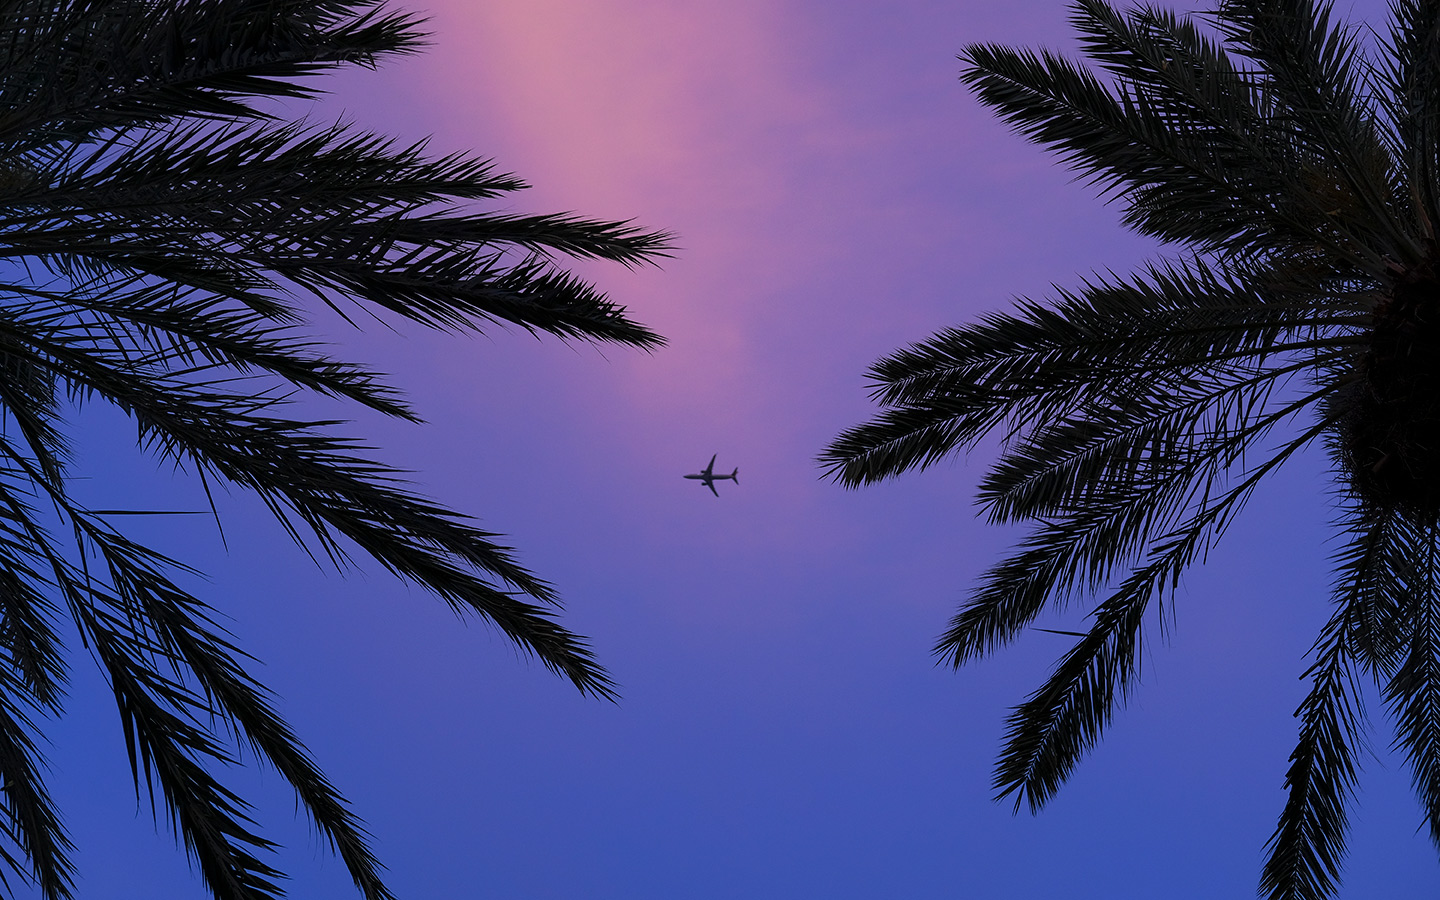 Airplane flying in pink and purple skies between two palm trees